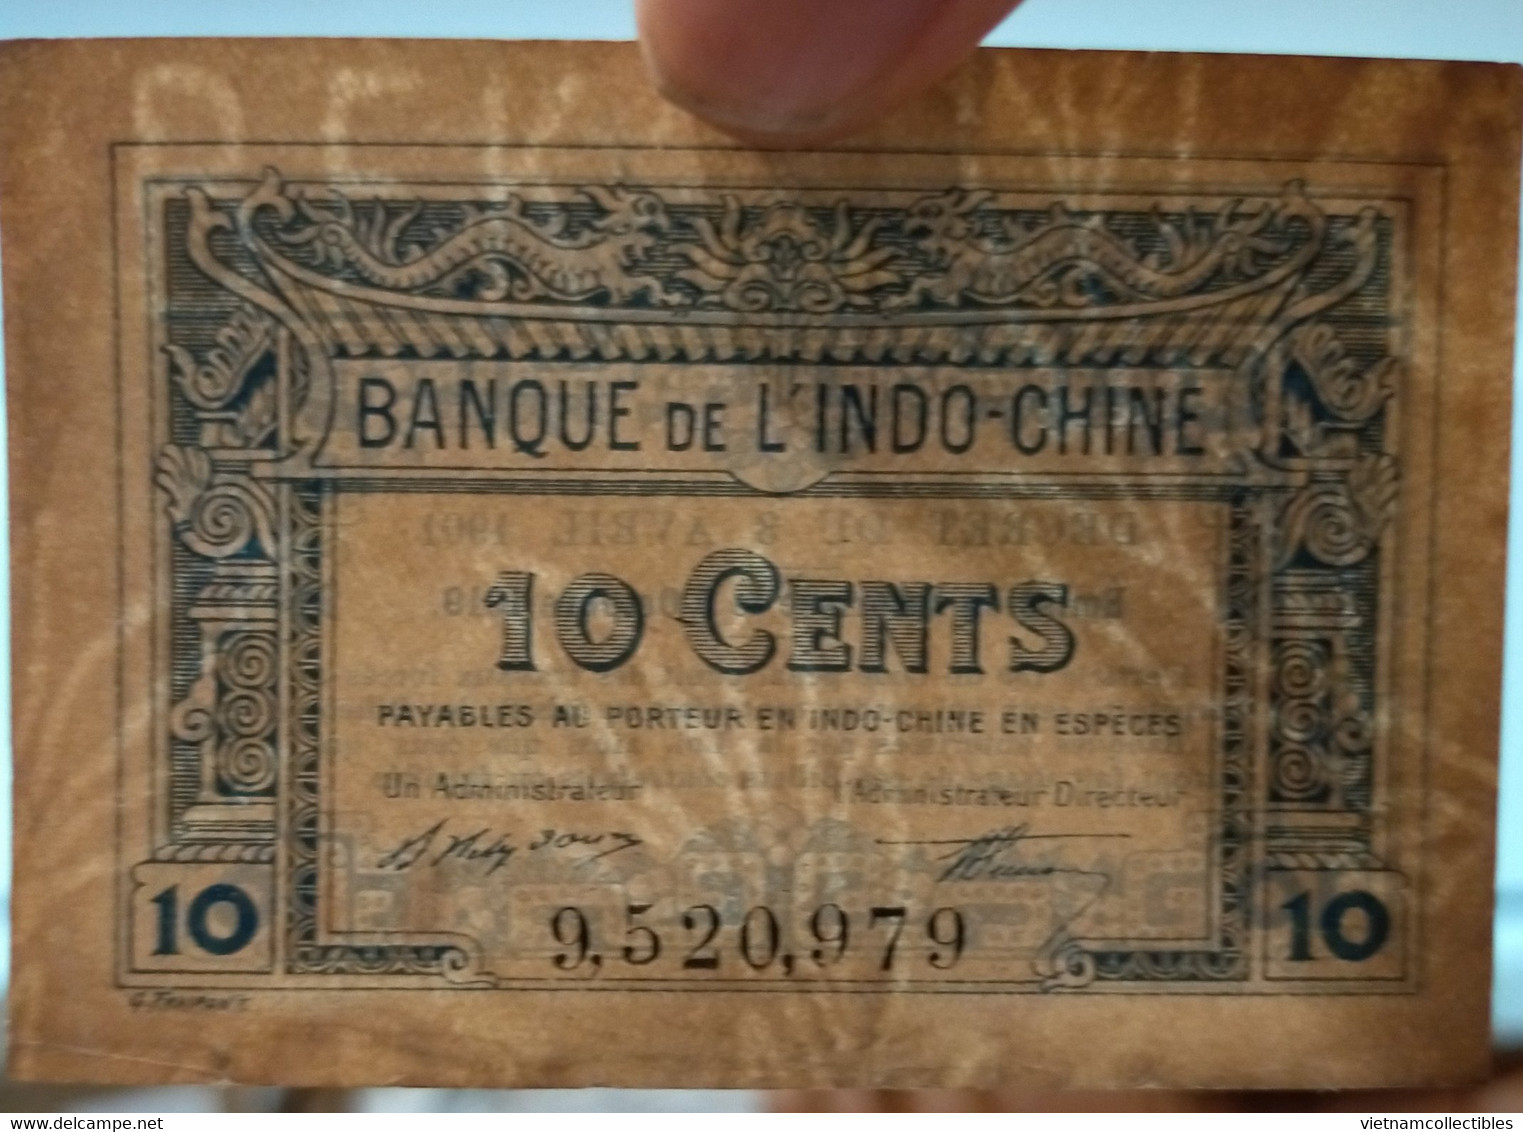 French Indochina Indo China Indochine Laos Vietnam Cambodia 10 Cents EF Banknote Note 1901 - 1919 - P# 43 / 03 Photos - Indocina